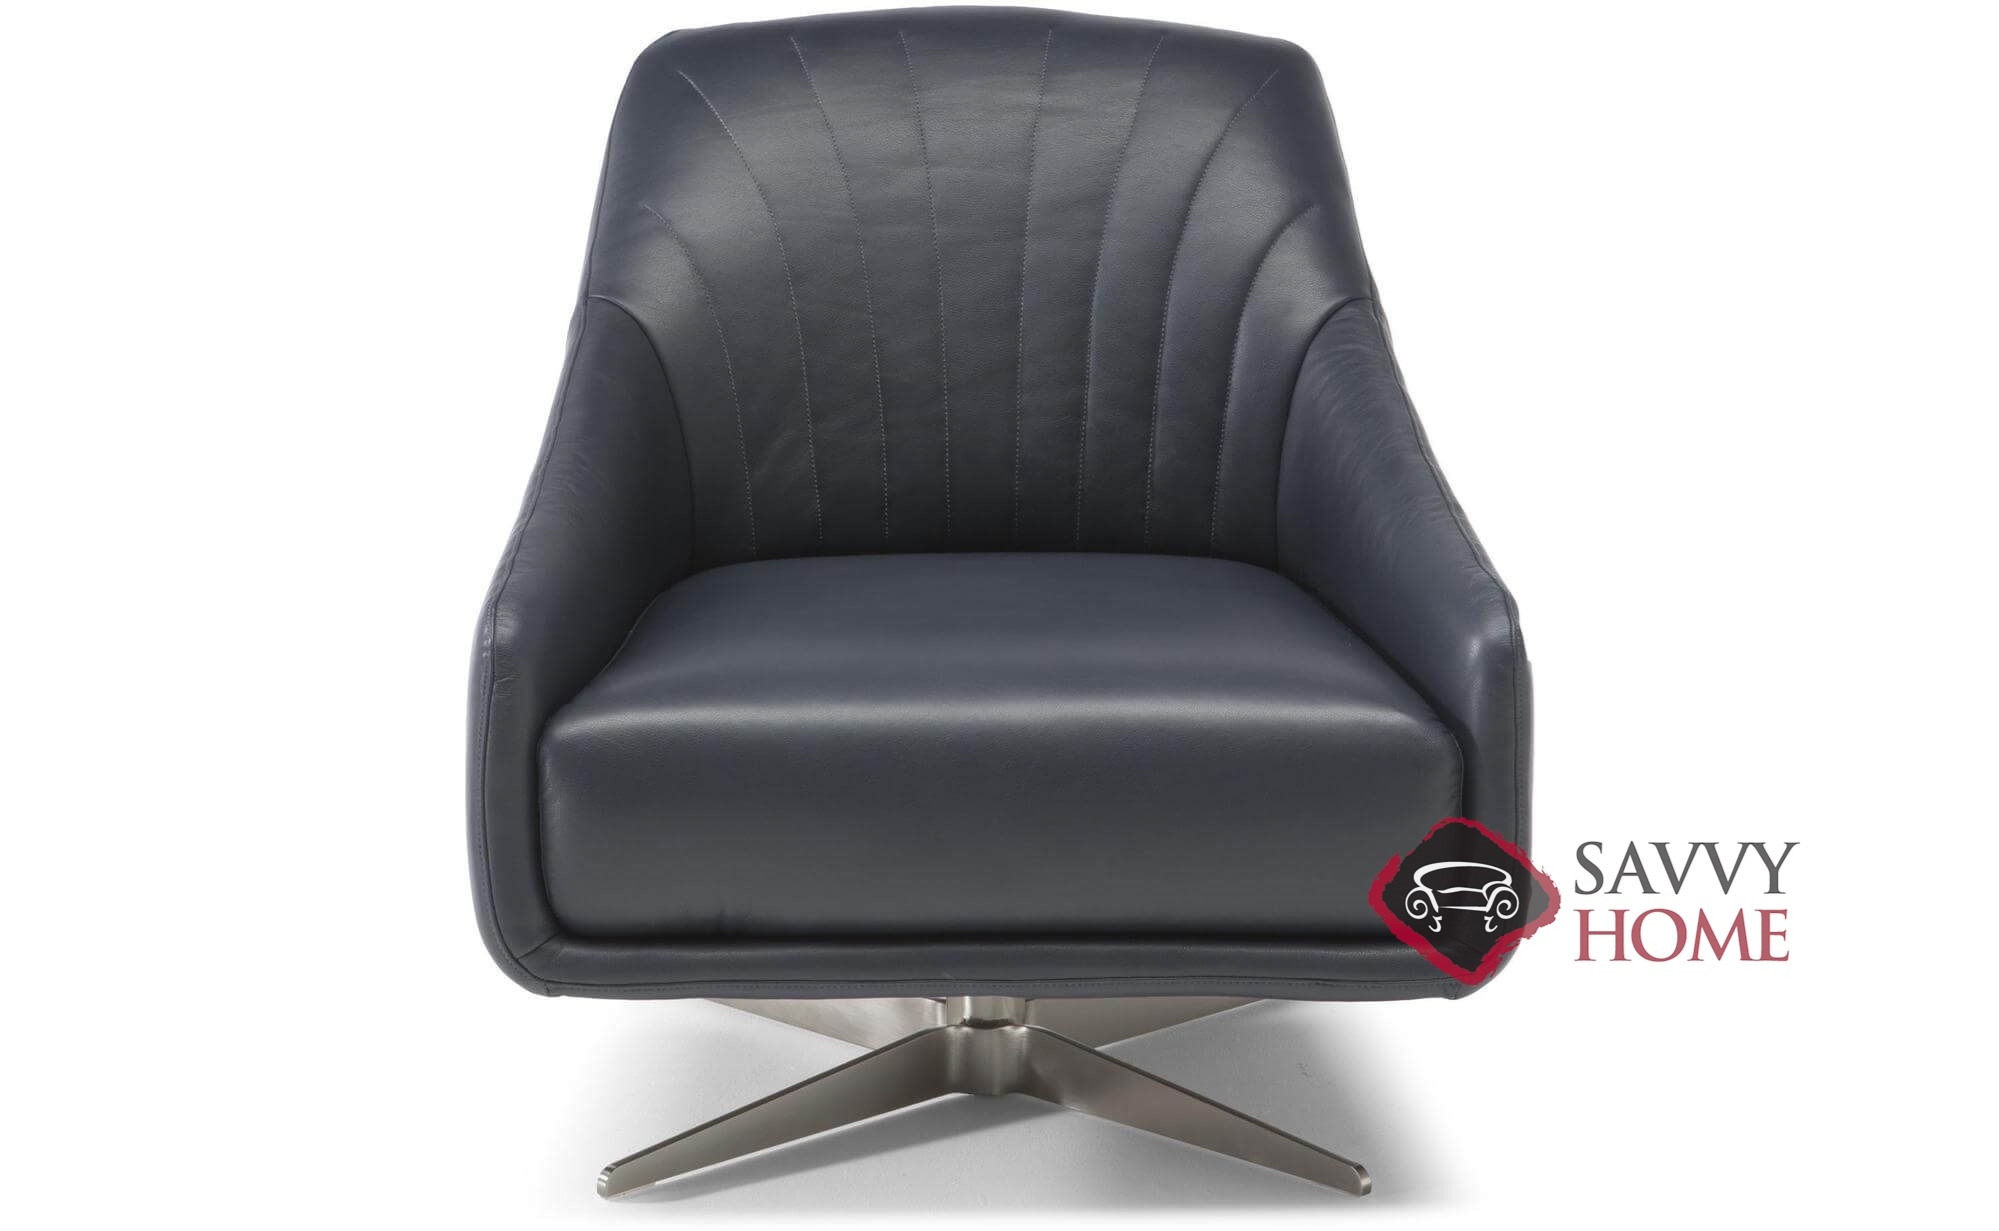 Felicita C014 Leather Stationary Swivel Chair By Natuzzi Is